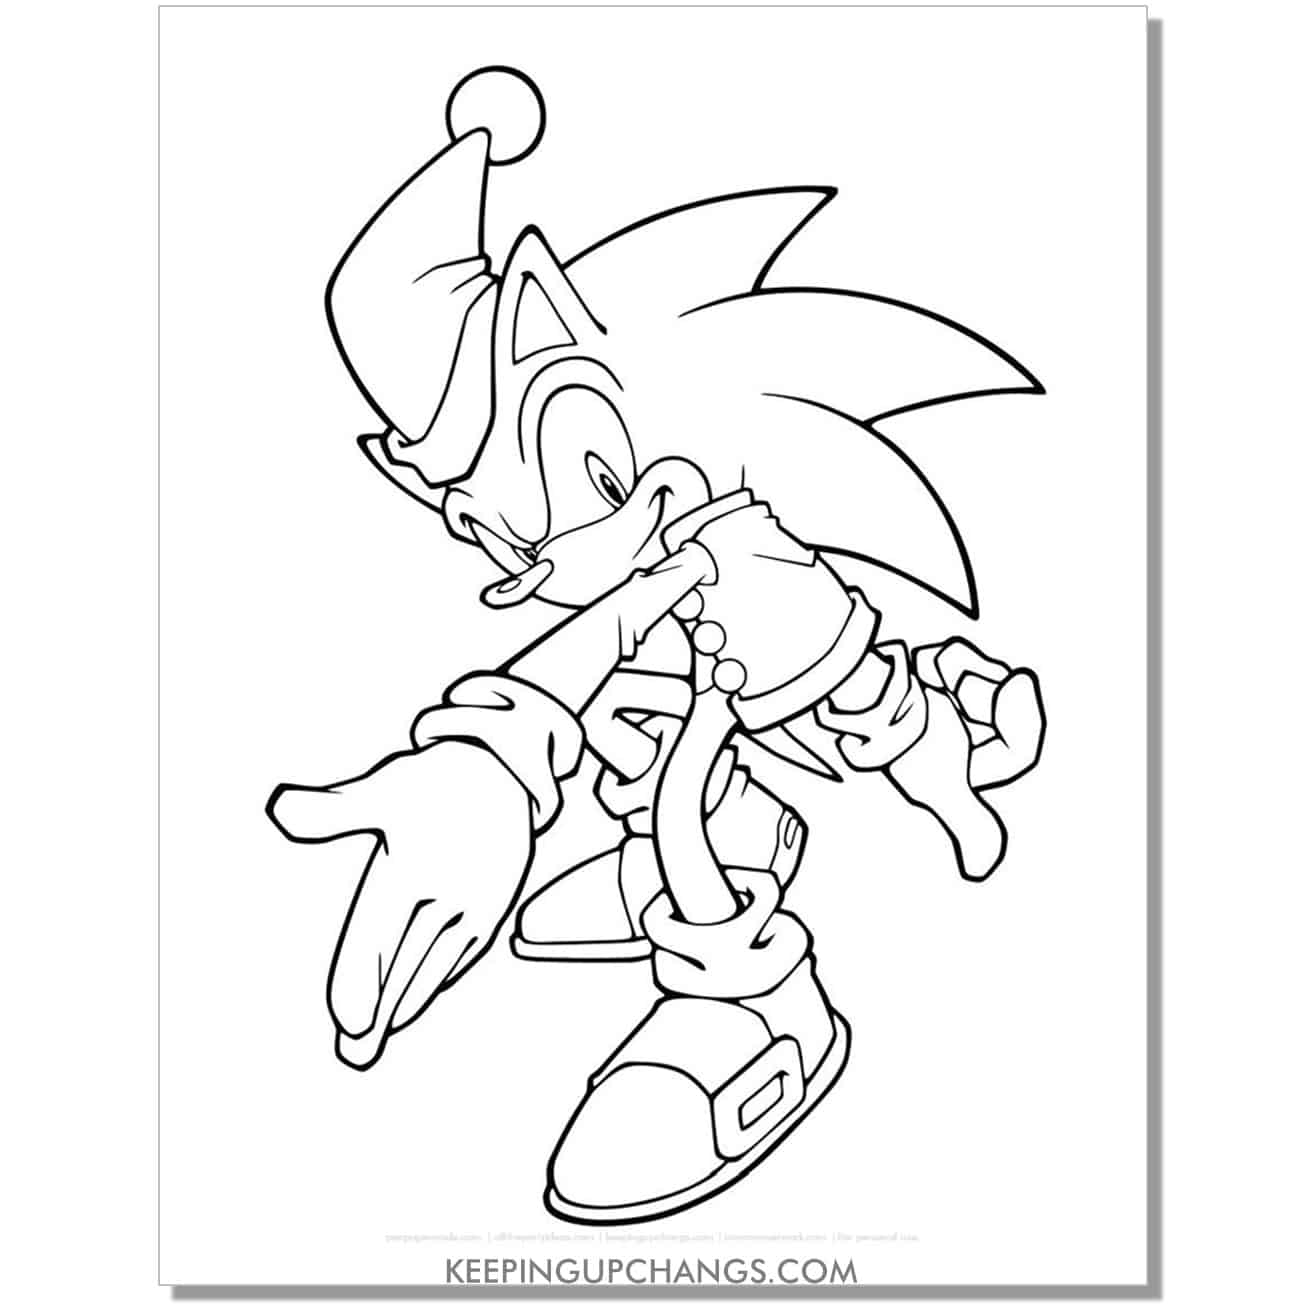 sonic christmas elf suit coloring page.